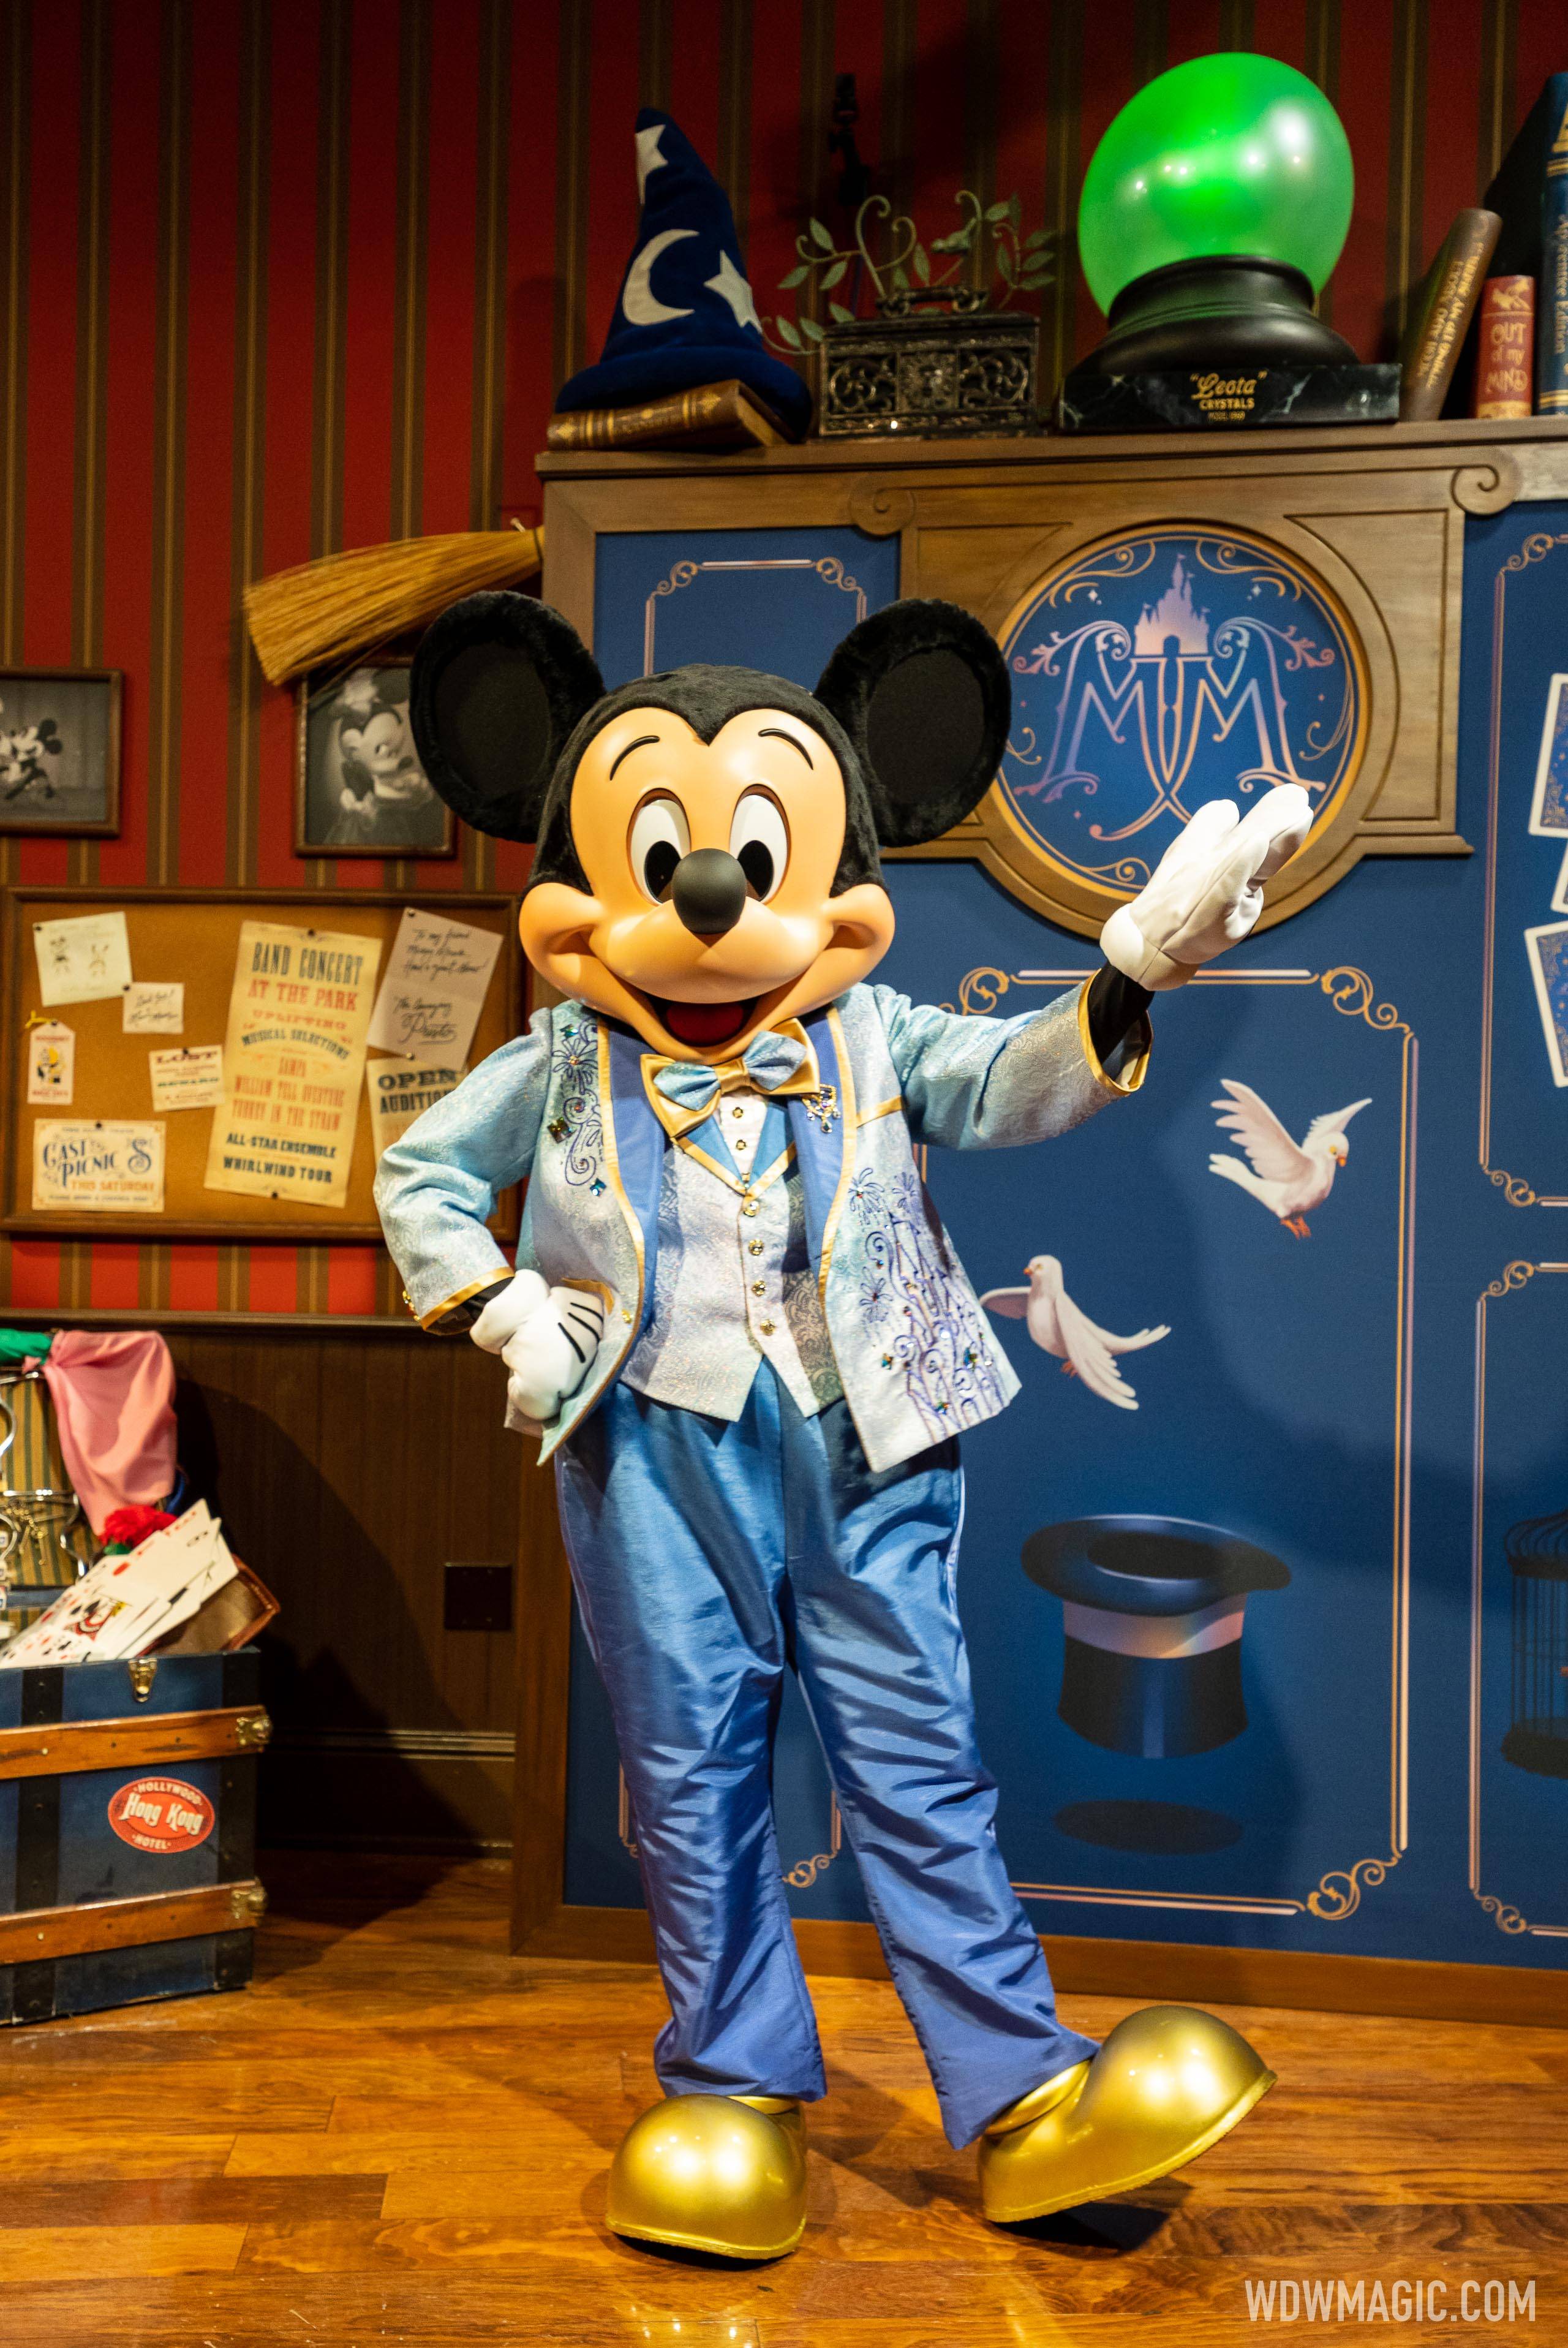 Town Square Theater character meet and greets